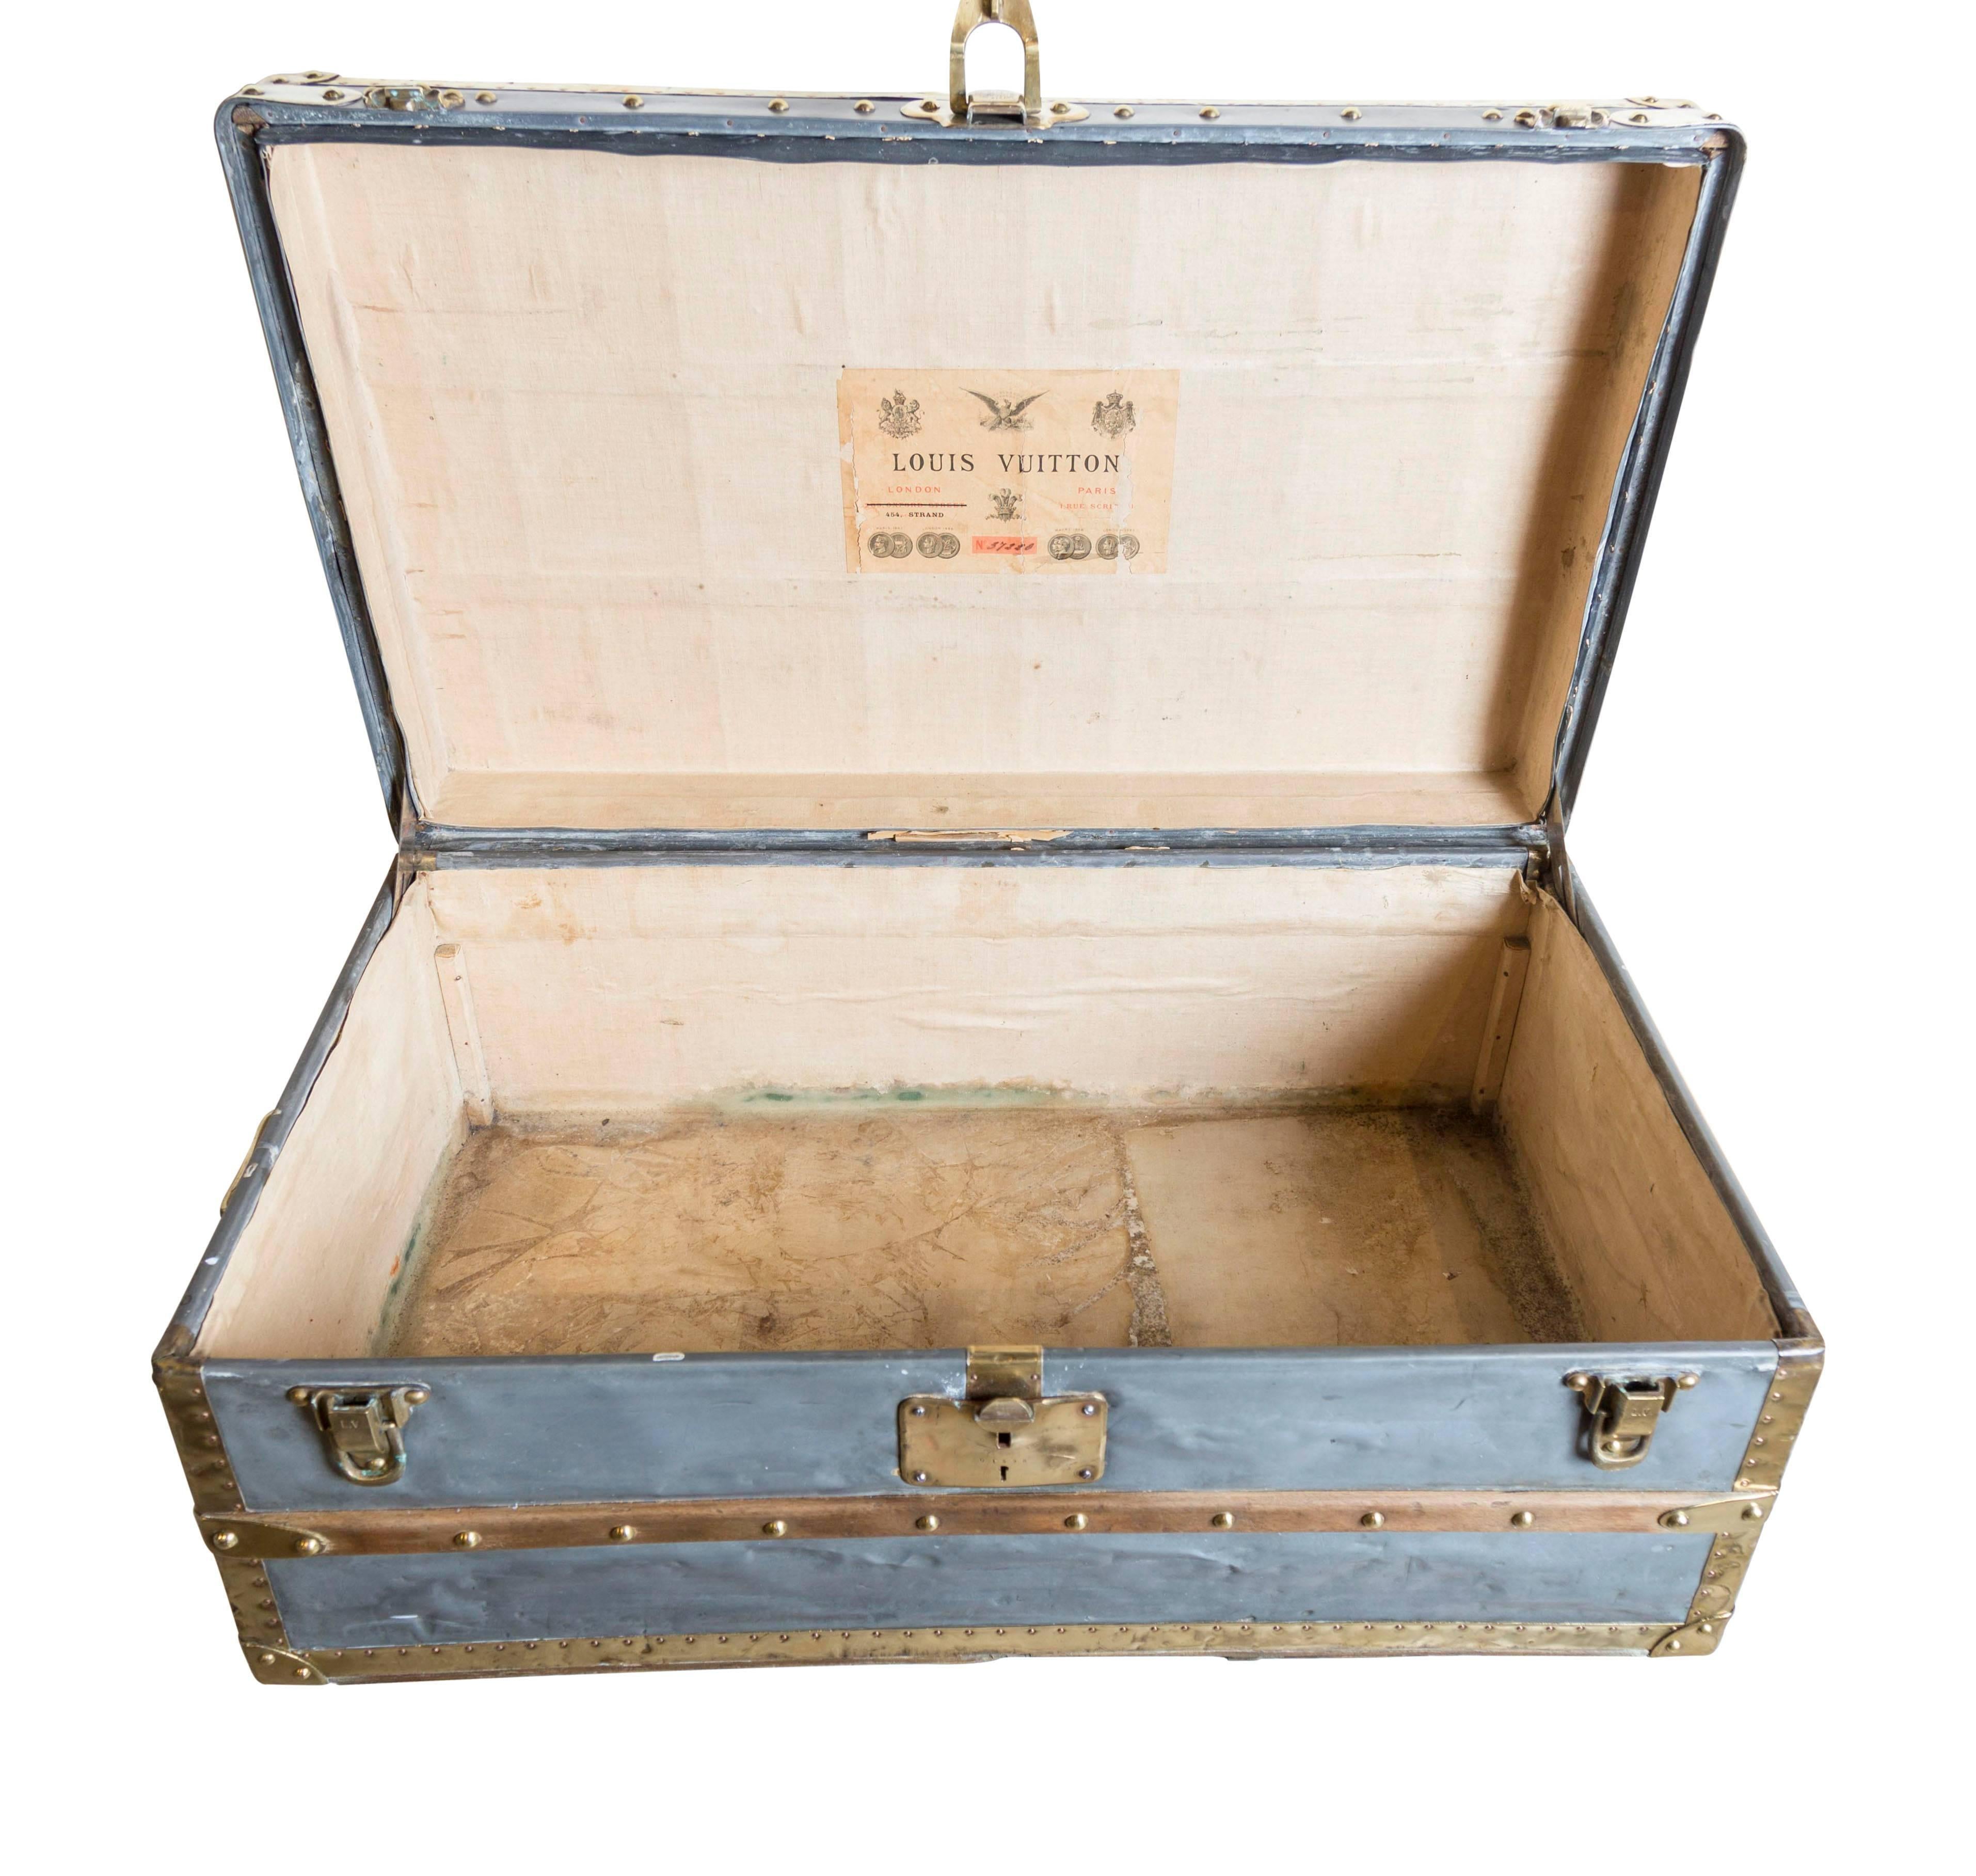 An extremely rare, and highly sought-after all-zinc covered small Malle Cabine (Cabin Trunk) with an all brass trim, LV brass studs, copper pins, brass side handles and locks, with two wooden slats to the top, and a single slat to the front. The